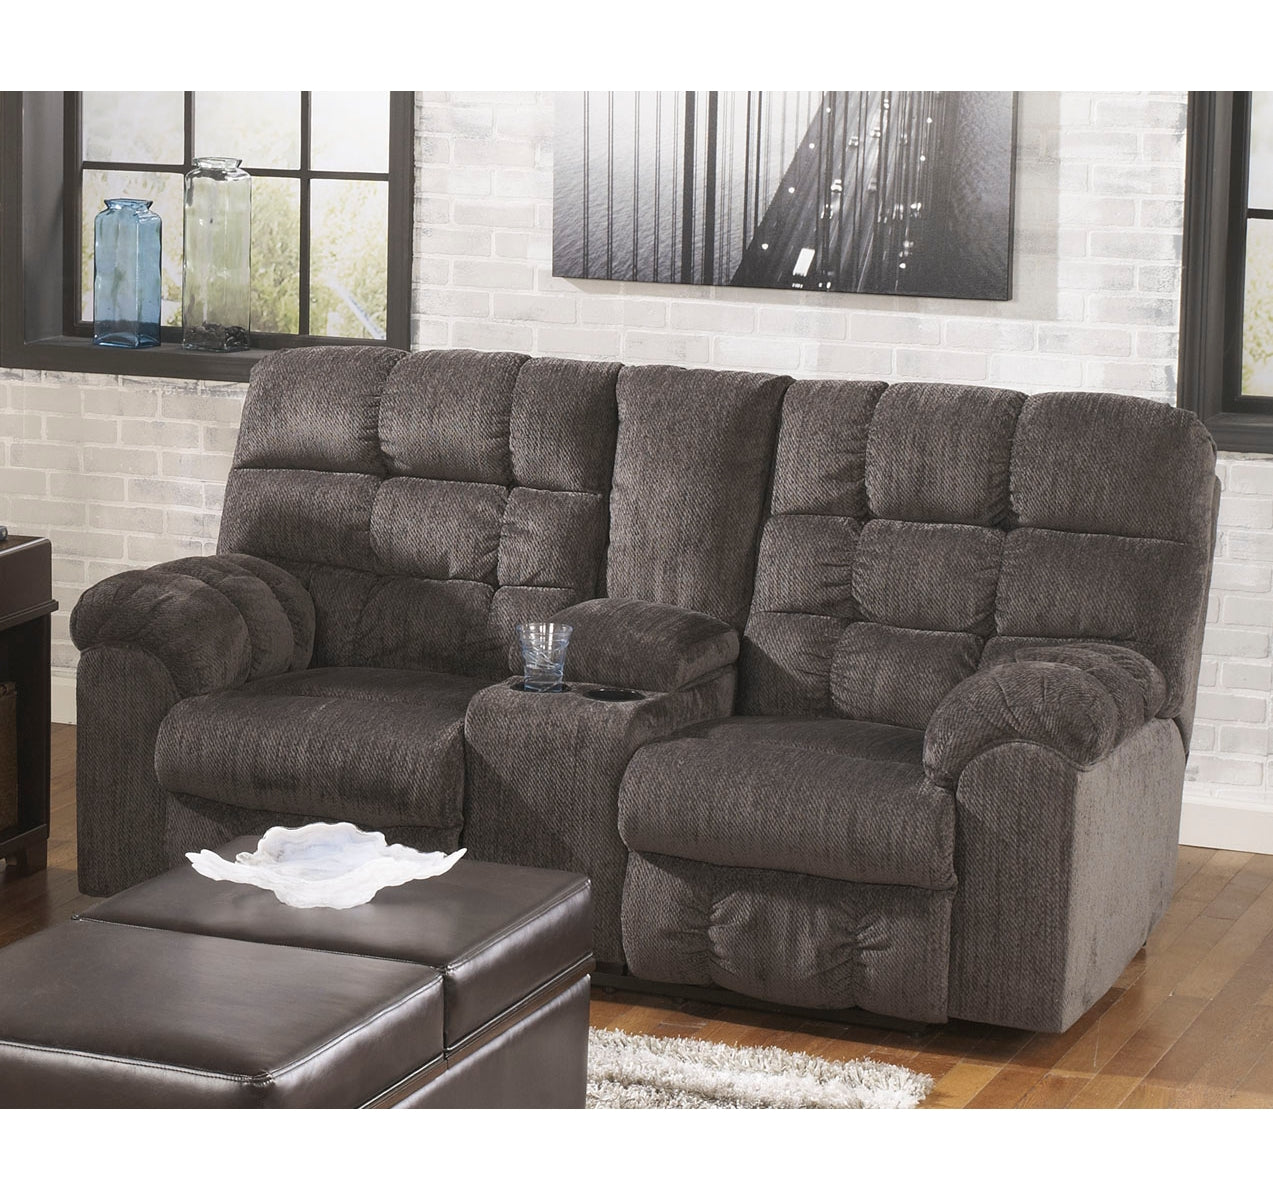 Acieona Reclining Loveseat with Console